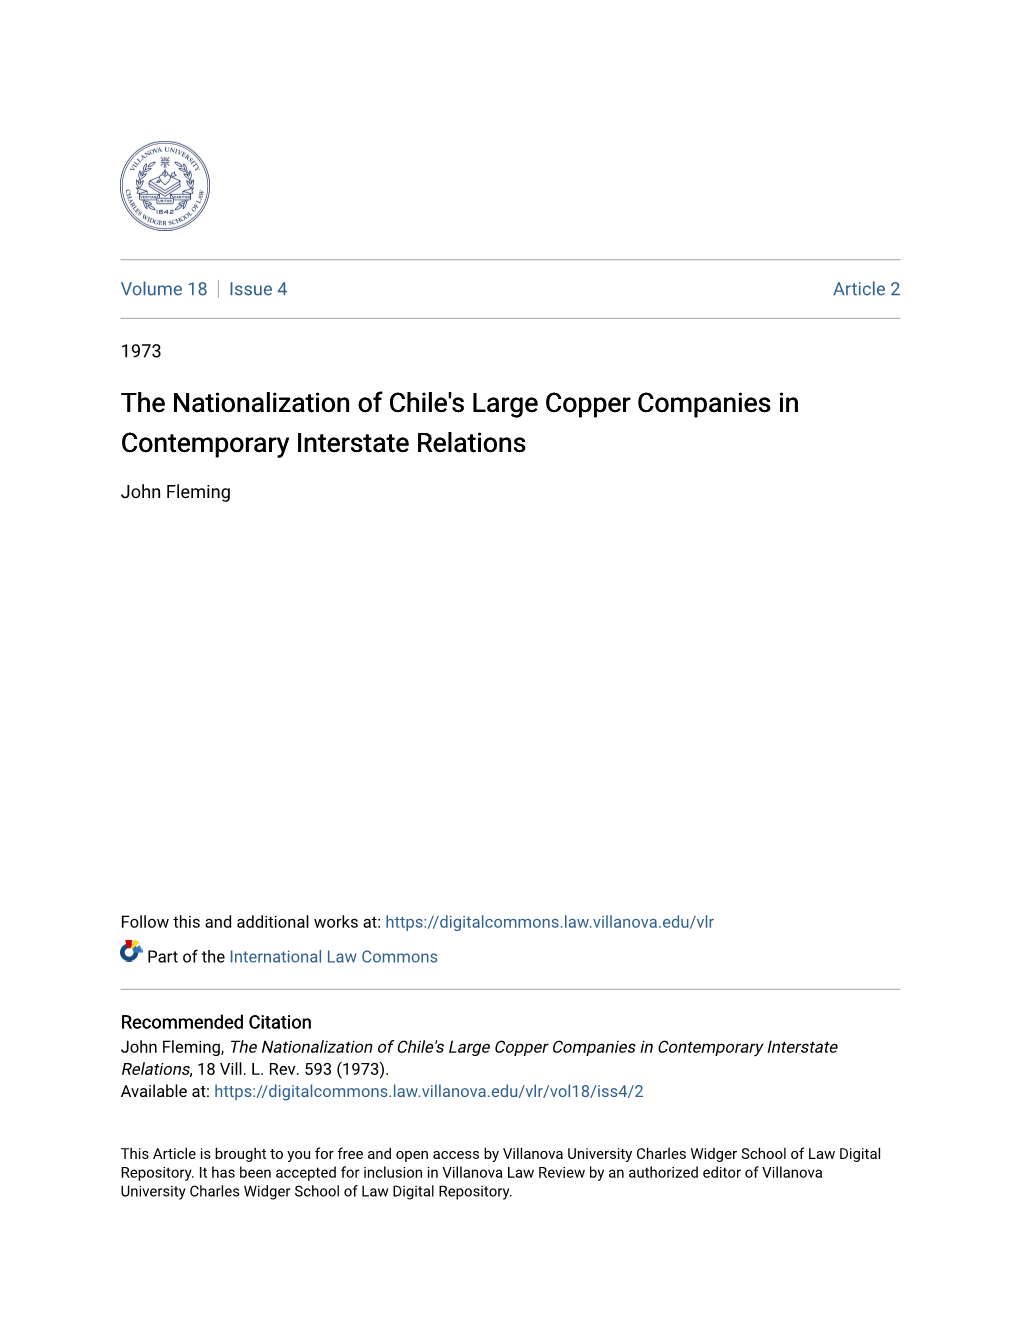 The Nationalization of Chile's Large Copper Companies in Contemporary Interstate Relations